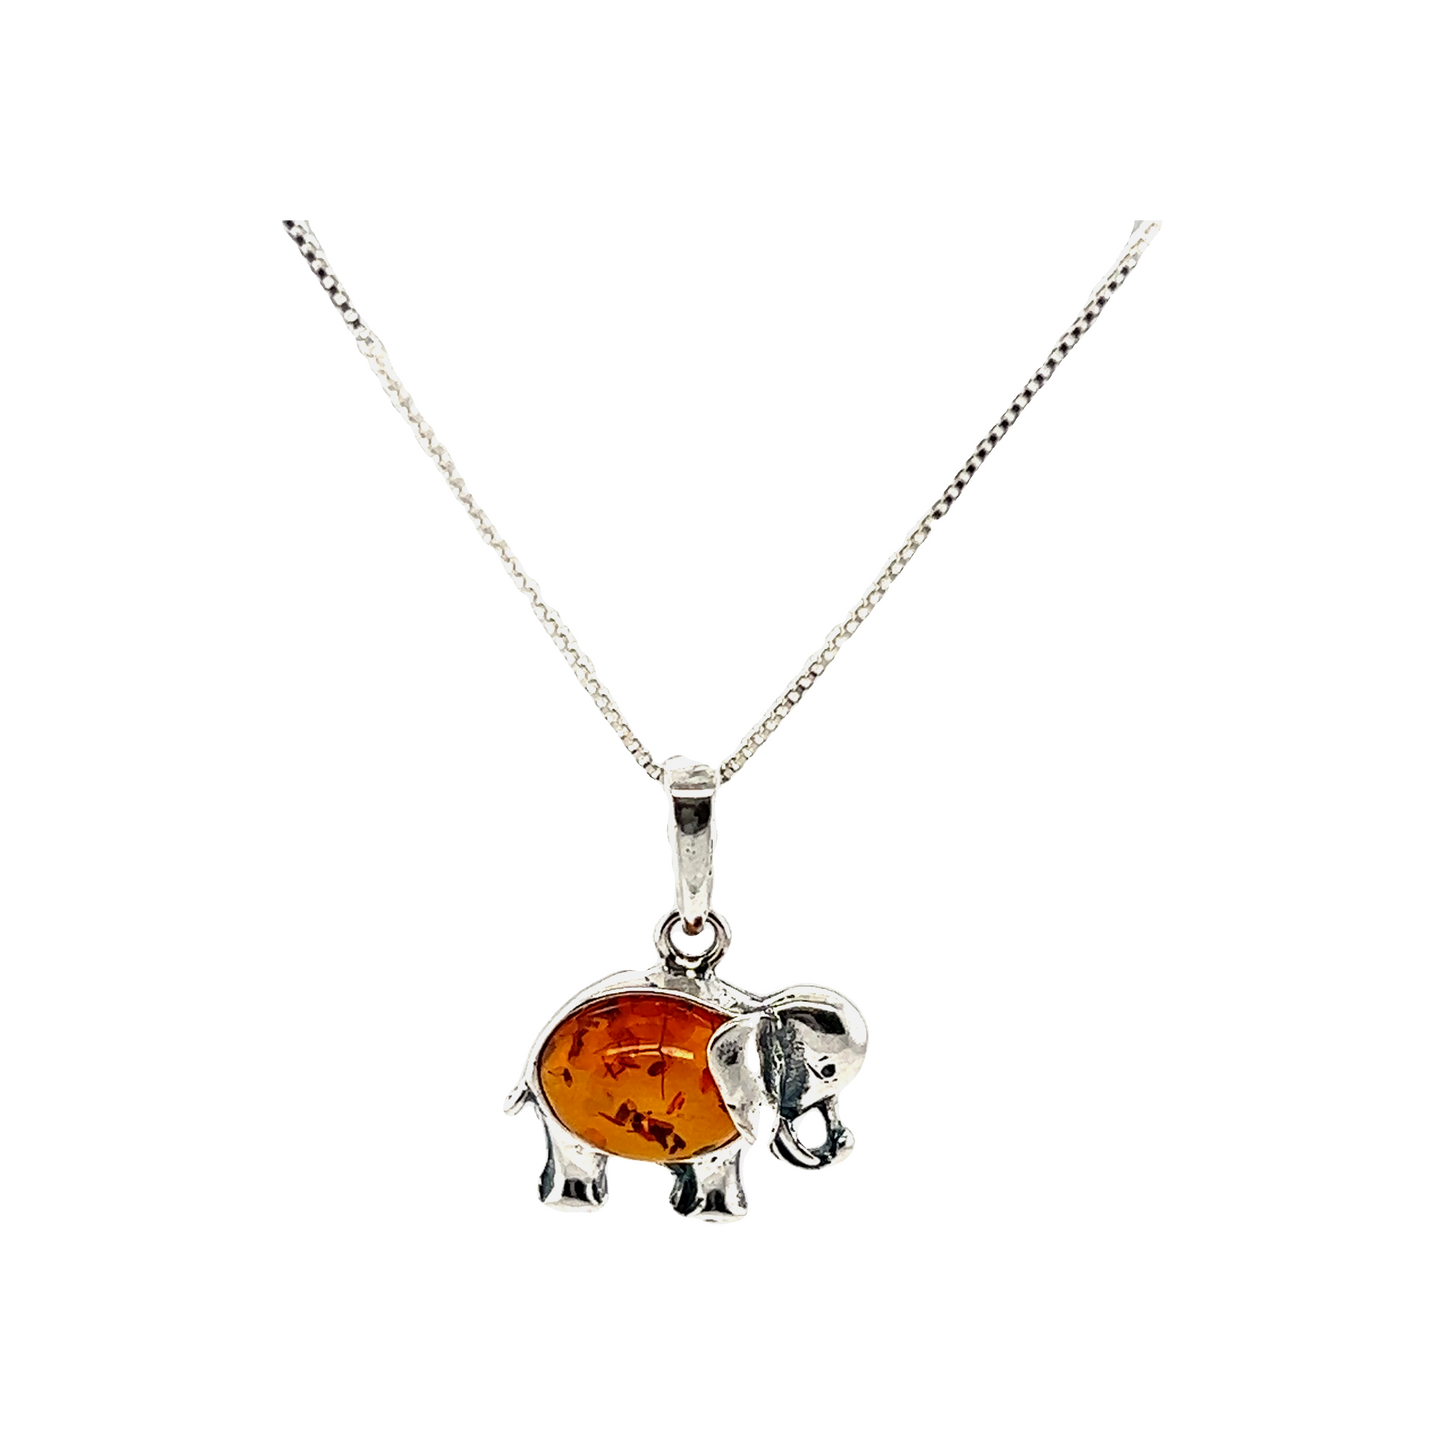 A Super Silver sterling silver necklace with a Dainty Amber Elephant Pendant.